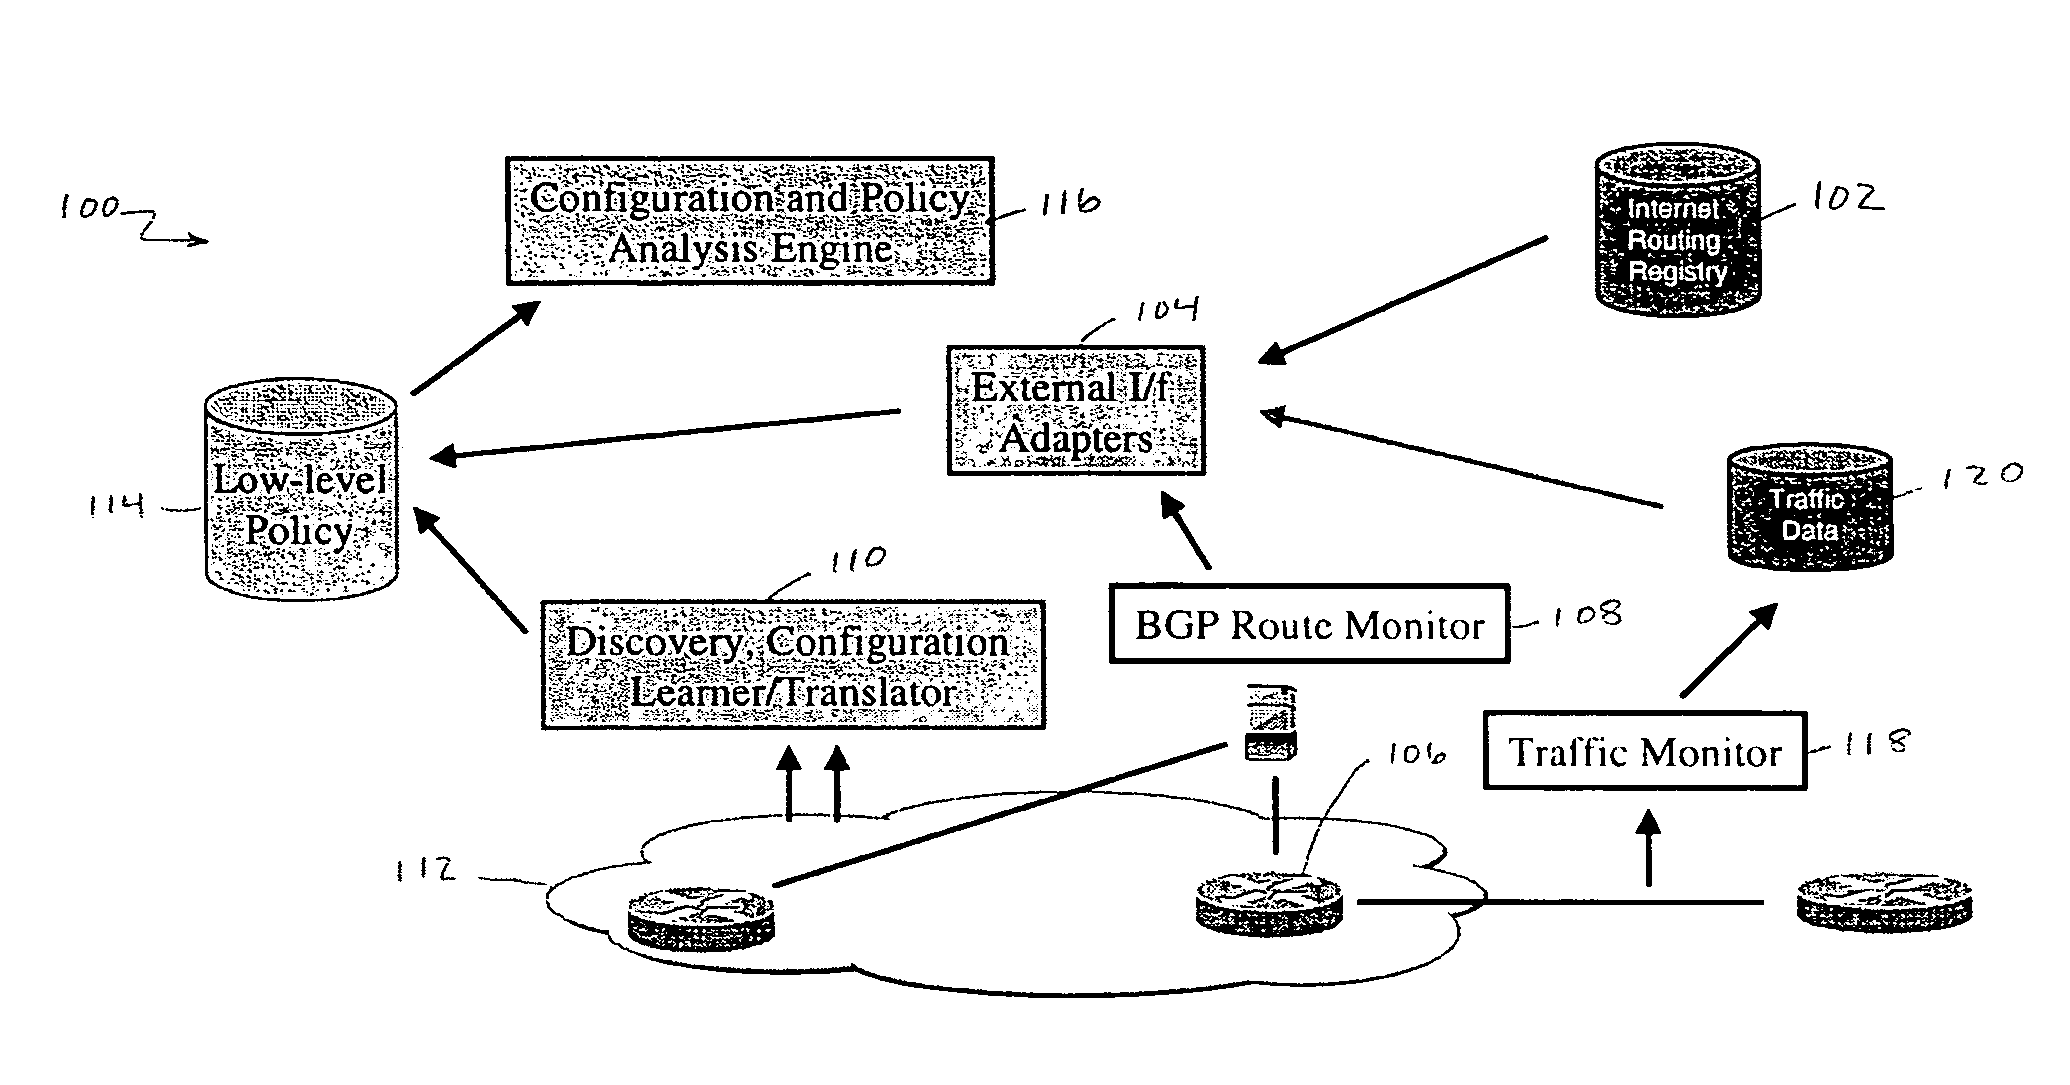 System and method for statistical analysis of border gateway protocol (BGP) configurations